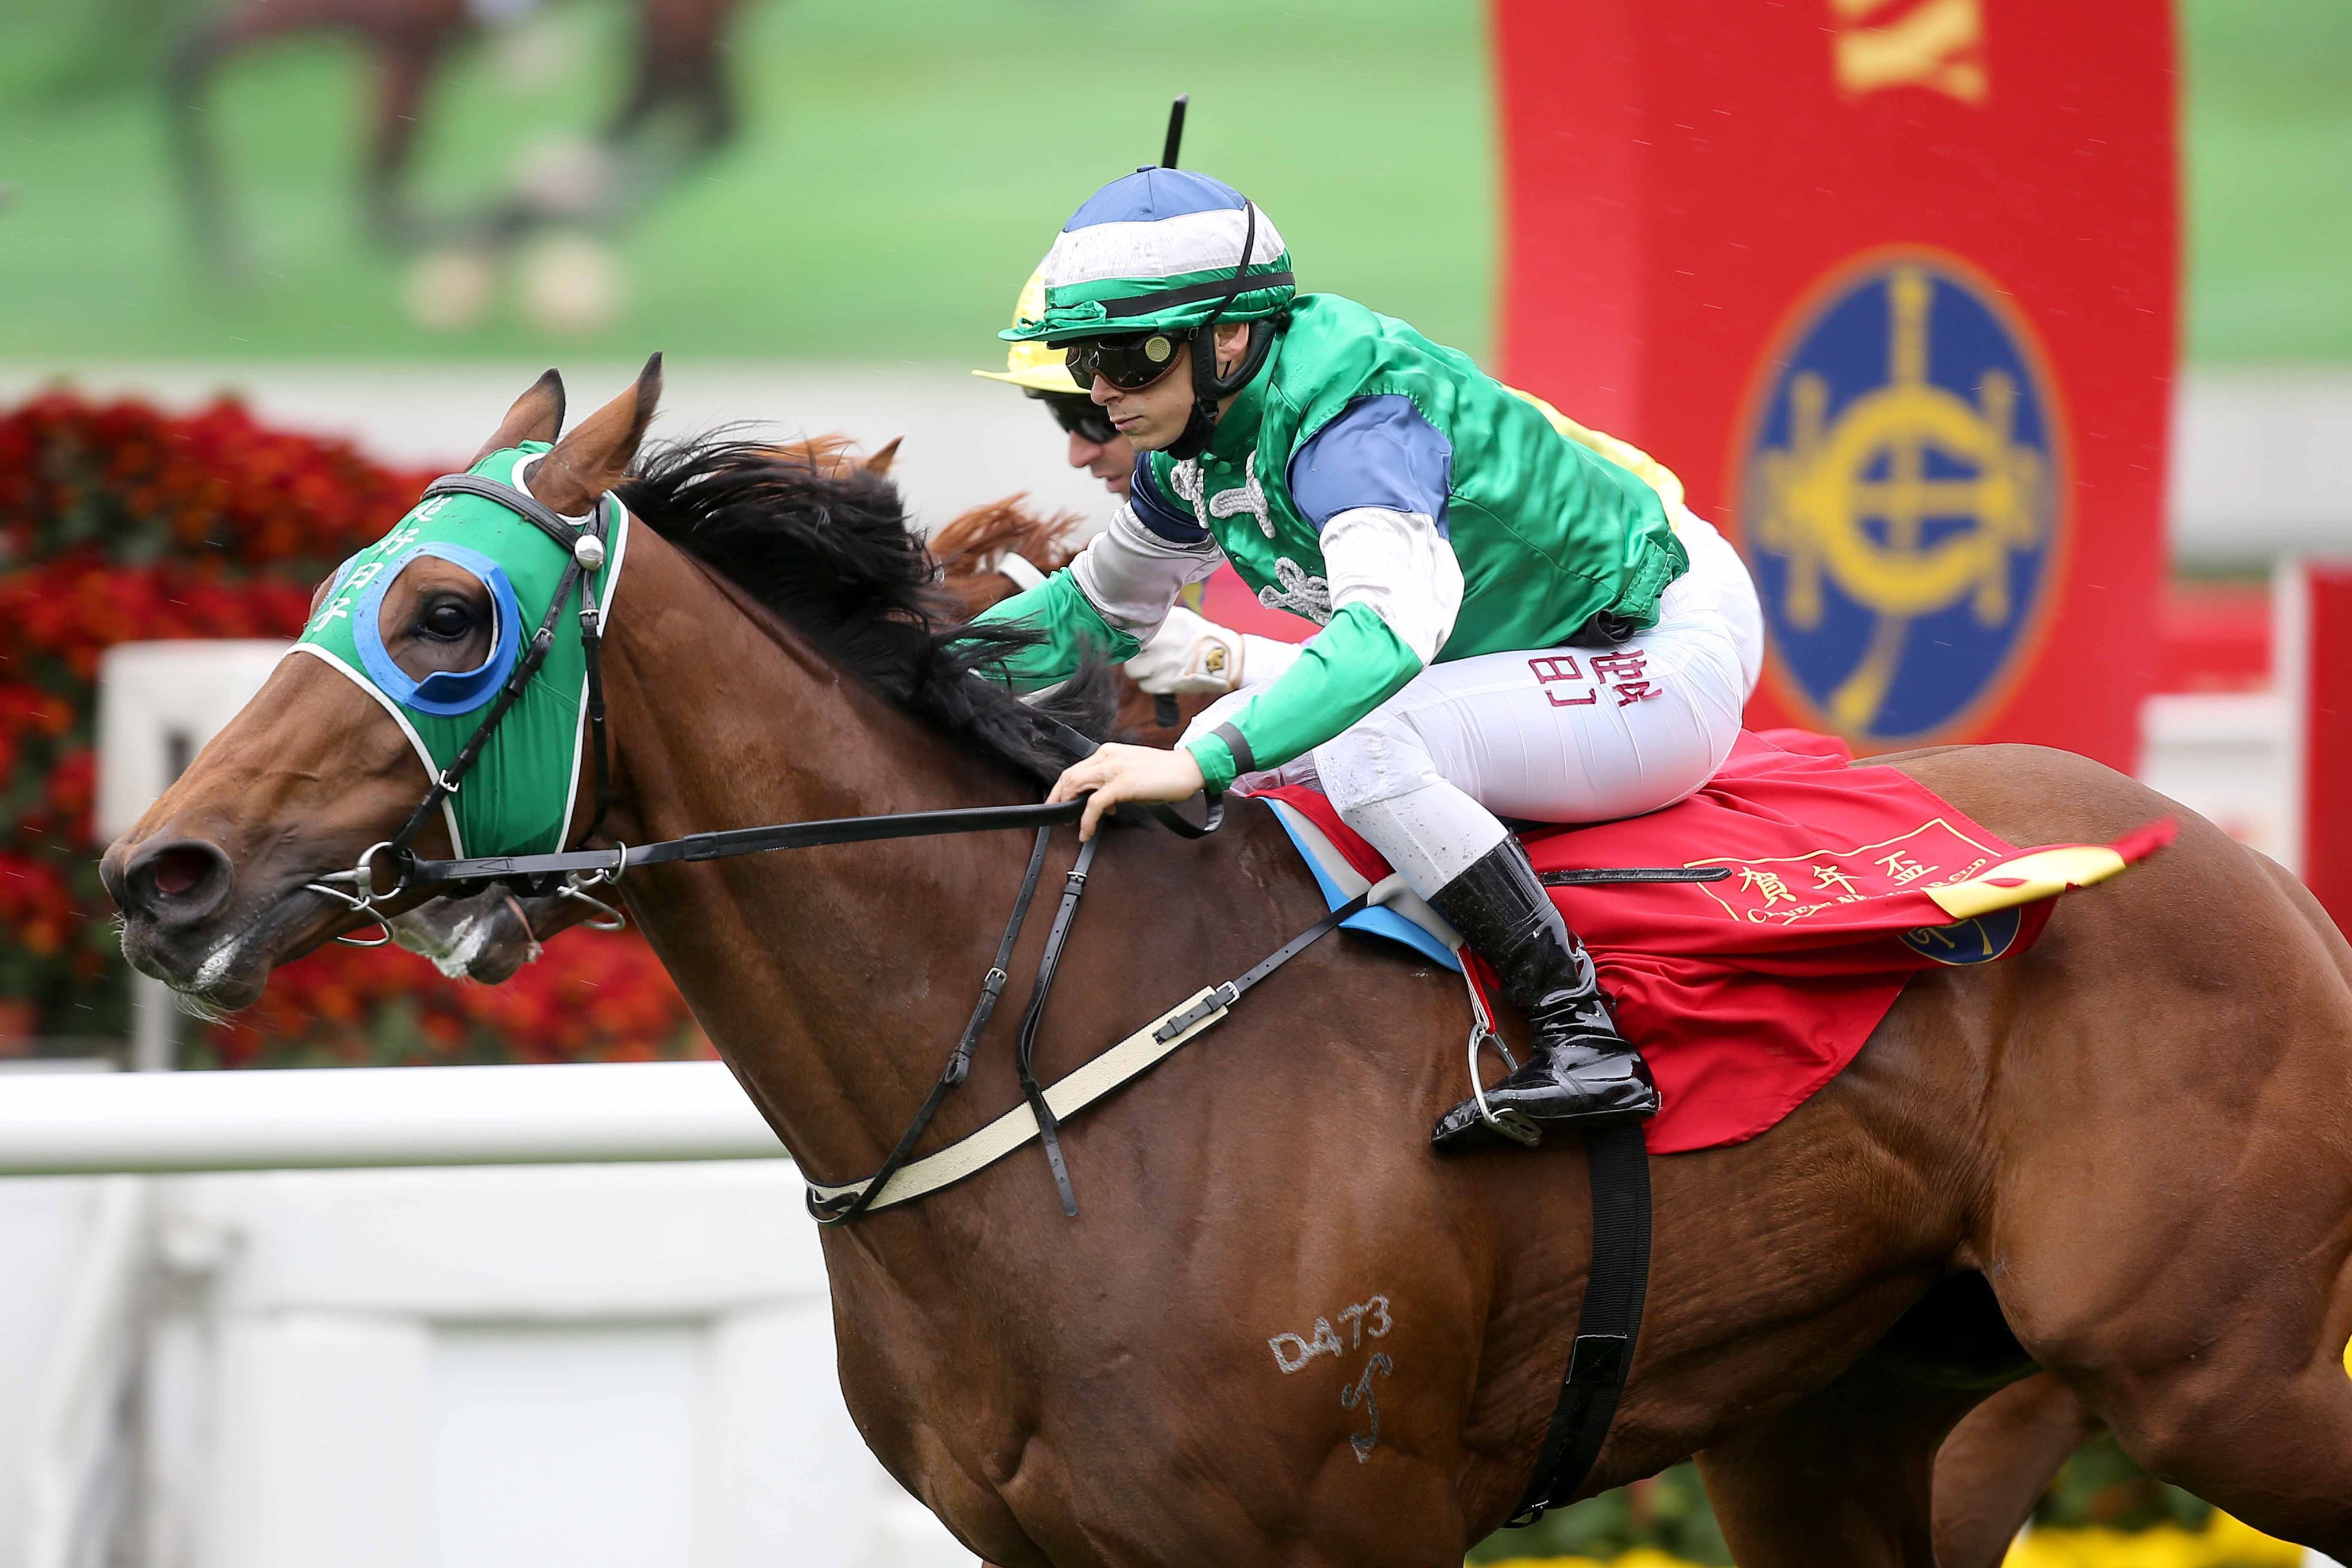 Cheerful Days, ridden by Alexis Badel, wins the Chinese New Year Cup at Sha Tin. Photo: HKJC